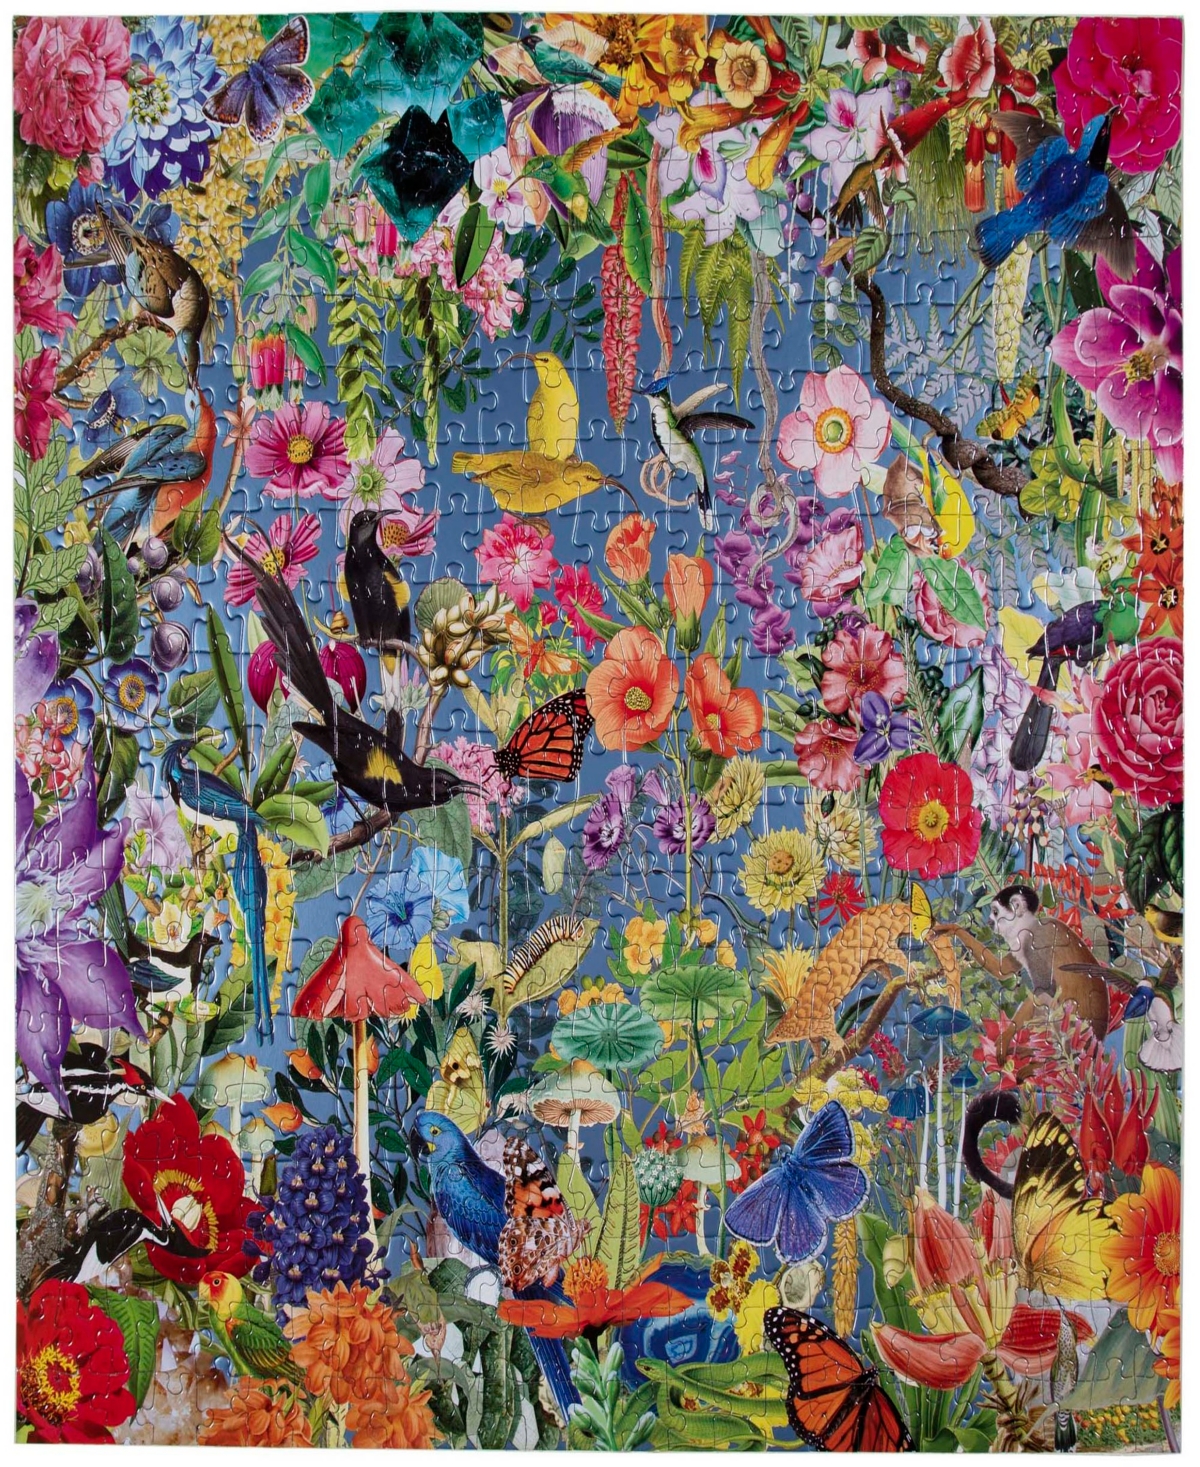 Shop Eeboo Piece And Love Garden Of Eden 500 Piece Square Adult Jigsaw Puzzle Set, Ages 14 And Up In Multi